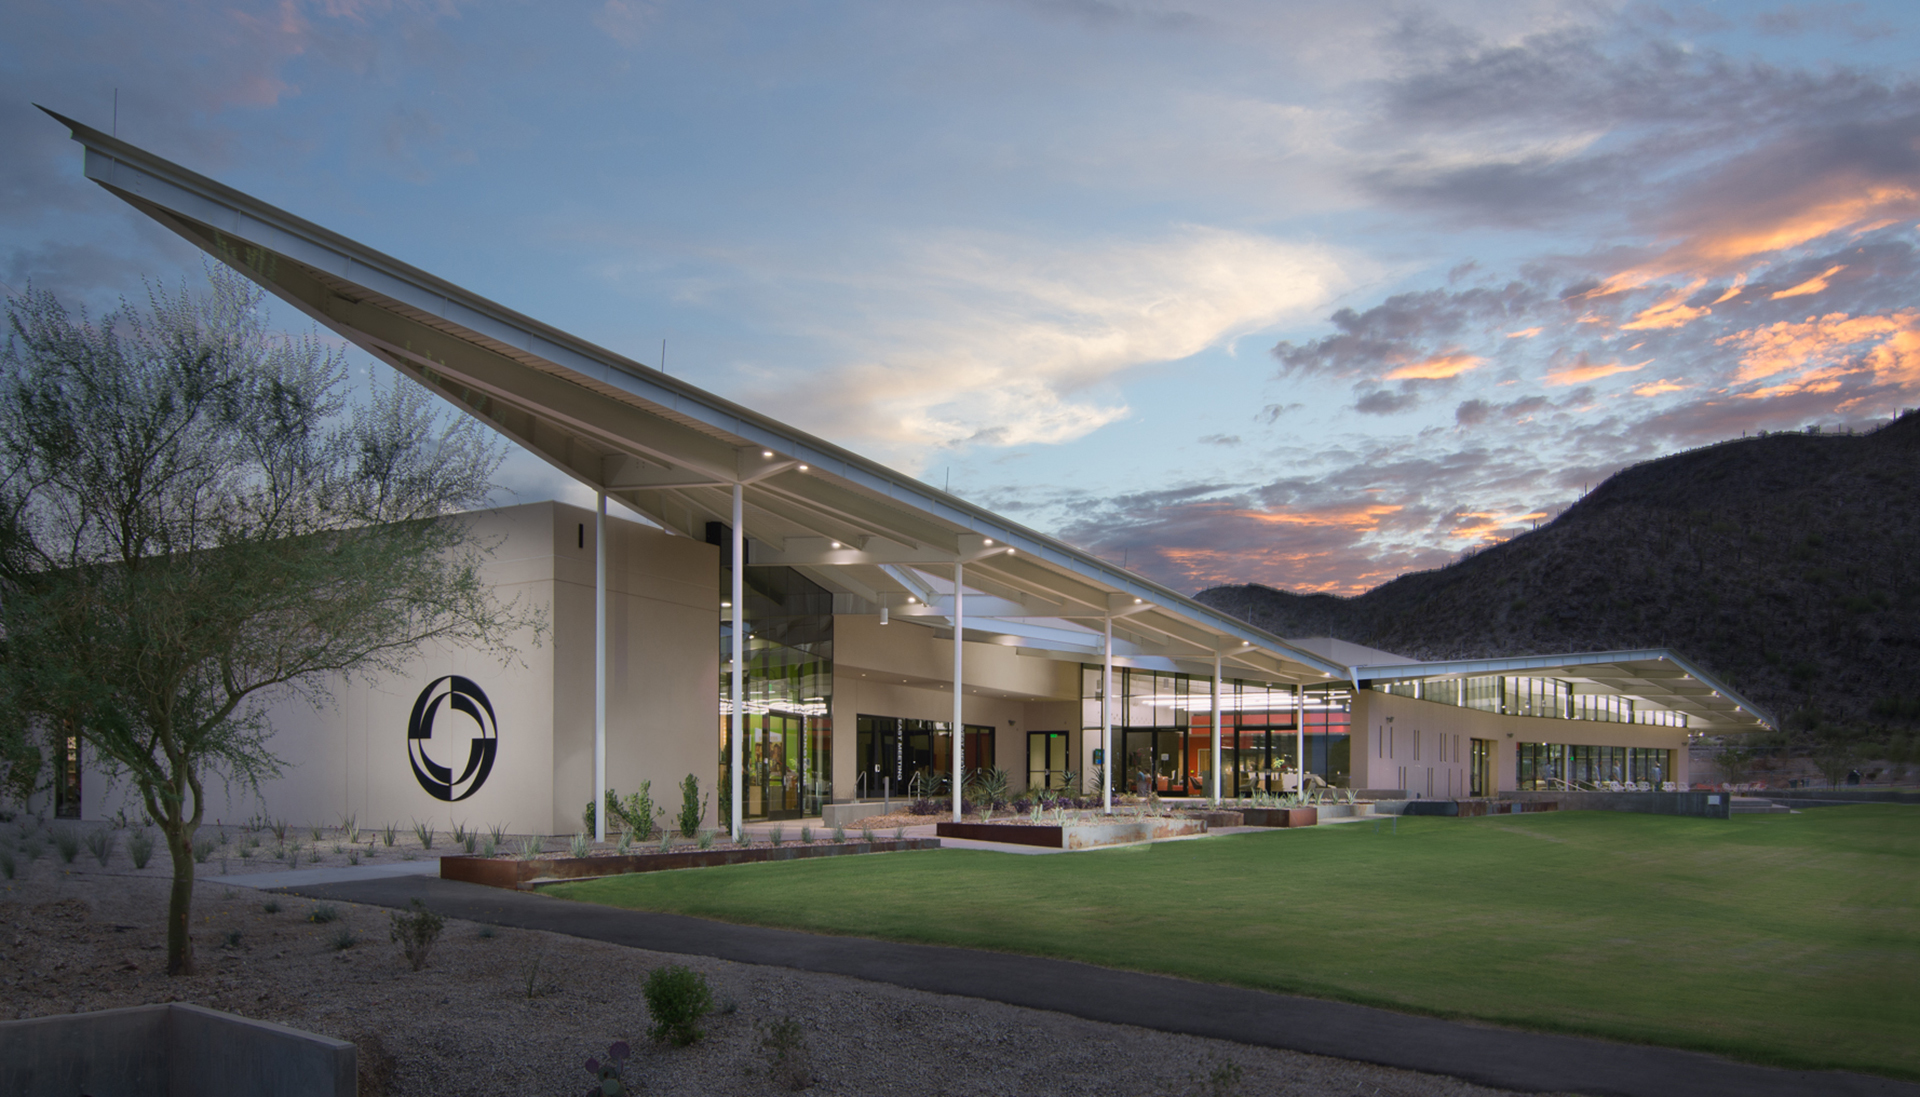 The exterior view of the new Central Arizona College Student Union.